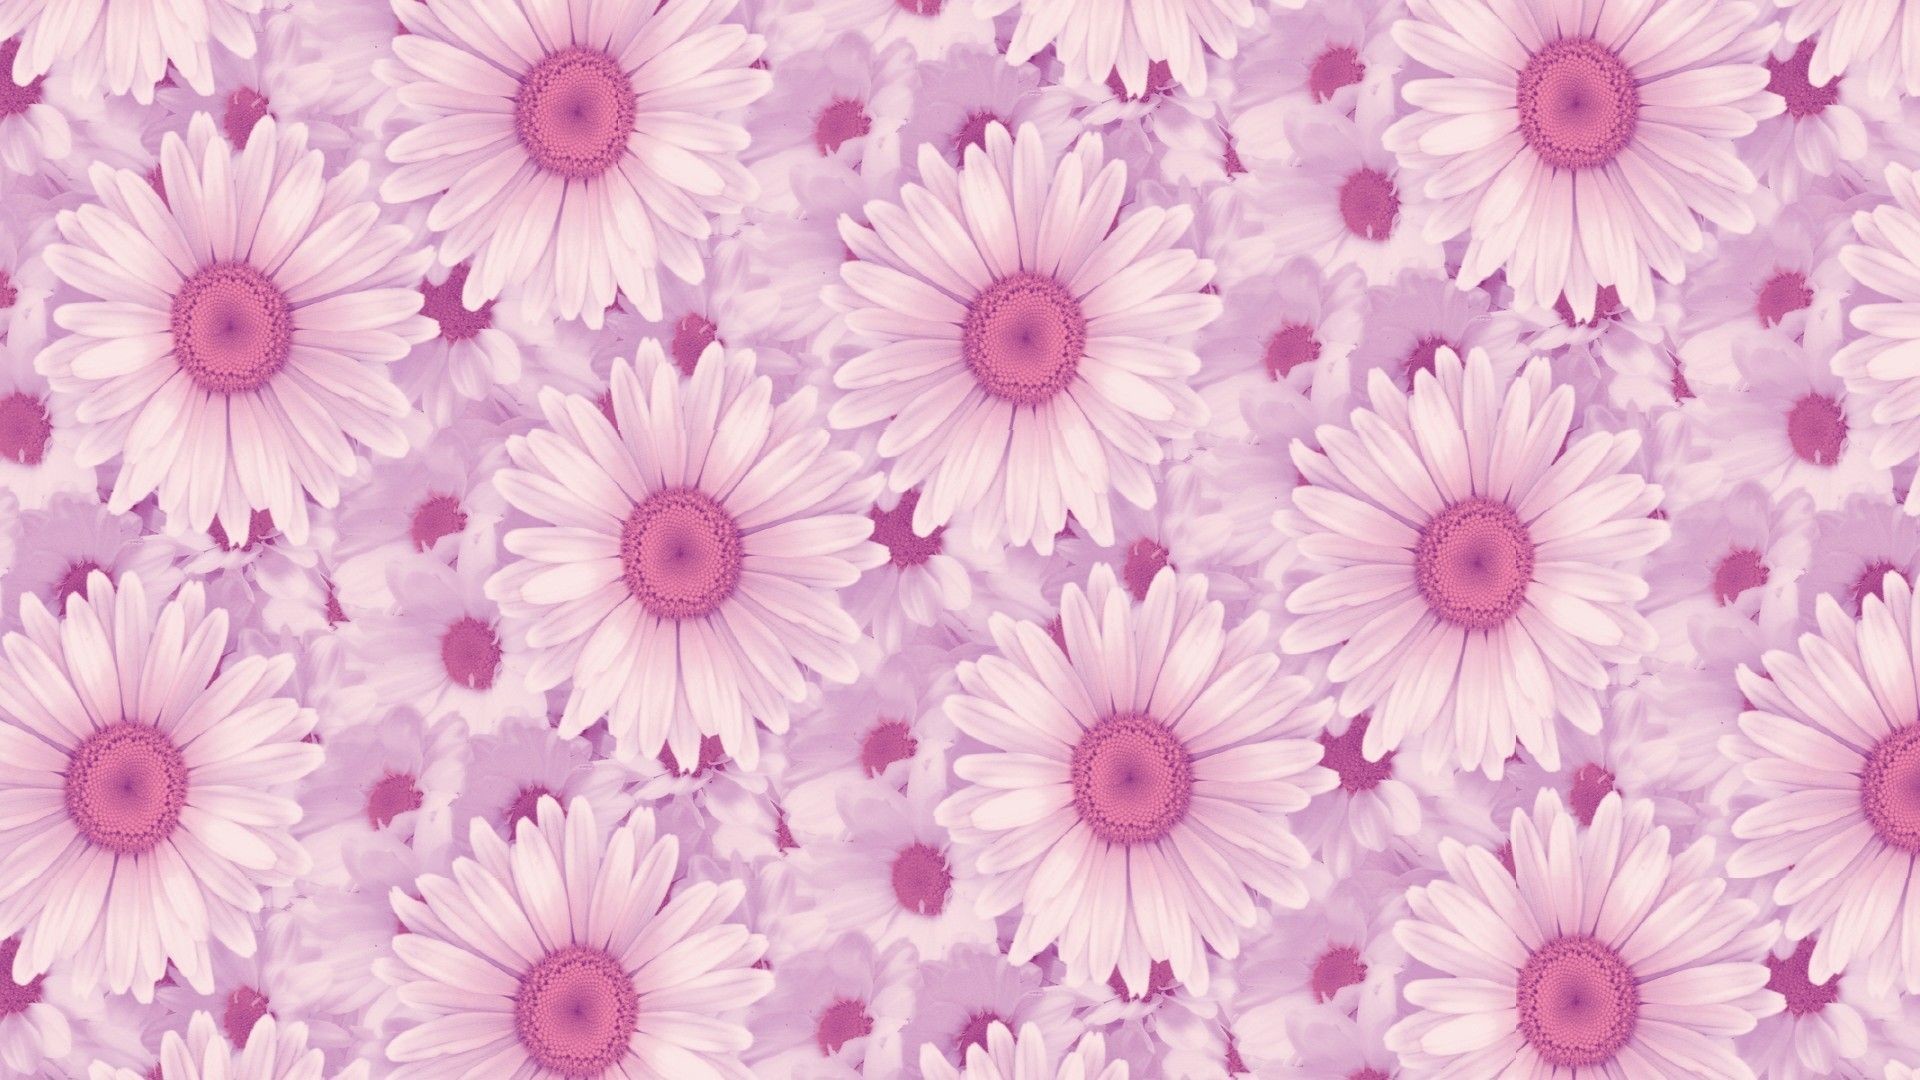 1920x1080 Related Pictures Daisies Background Wallpapers Pictures Photos 